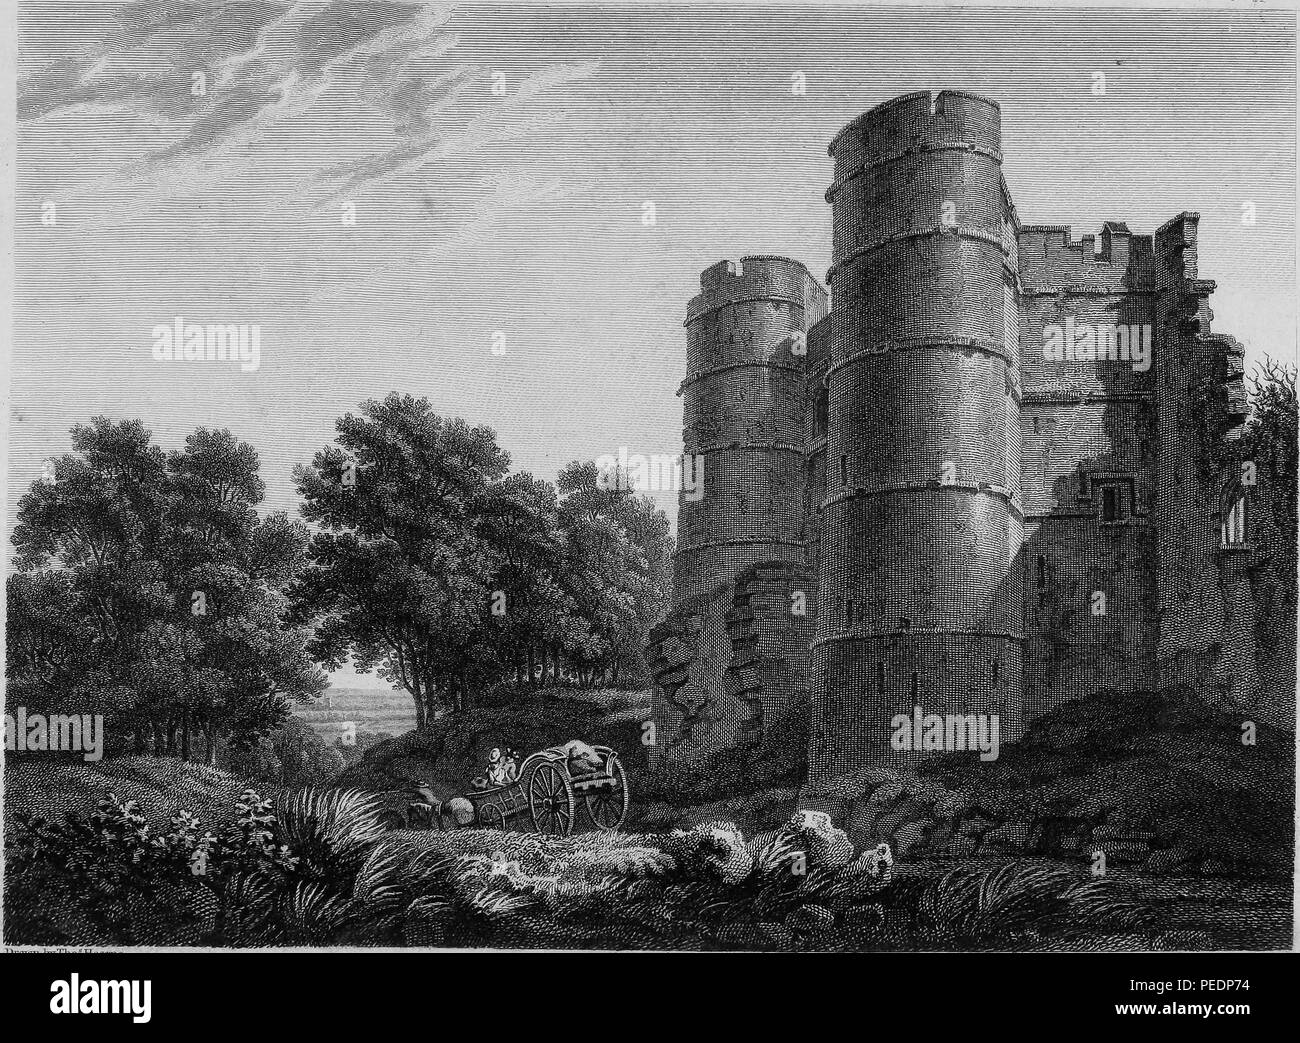 Black and white print showing 'Donnington Castle, ' a dilapidated medieval fortress, with castellations and two tall towers (likely the gatehouse) and a horse-drawn wagon receding into a lush country landscape, located in Berkshire, England, and originally engraved in 1778 by William Byrne after a drawing by T Hearne, 1807. Courtesy Internet Archive. () Stock Photo